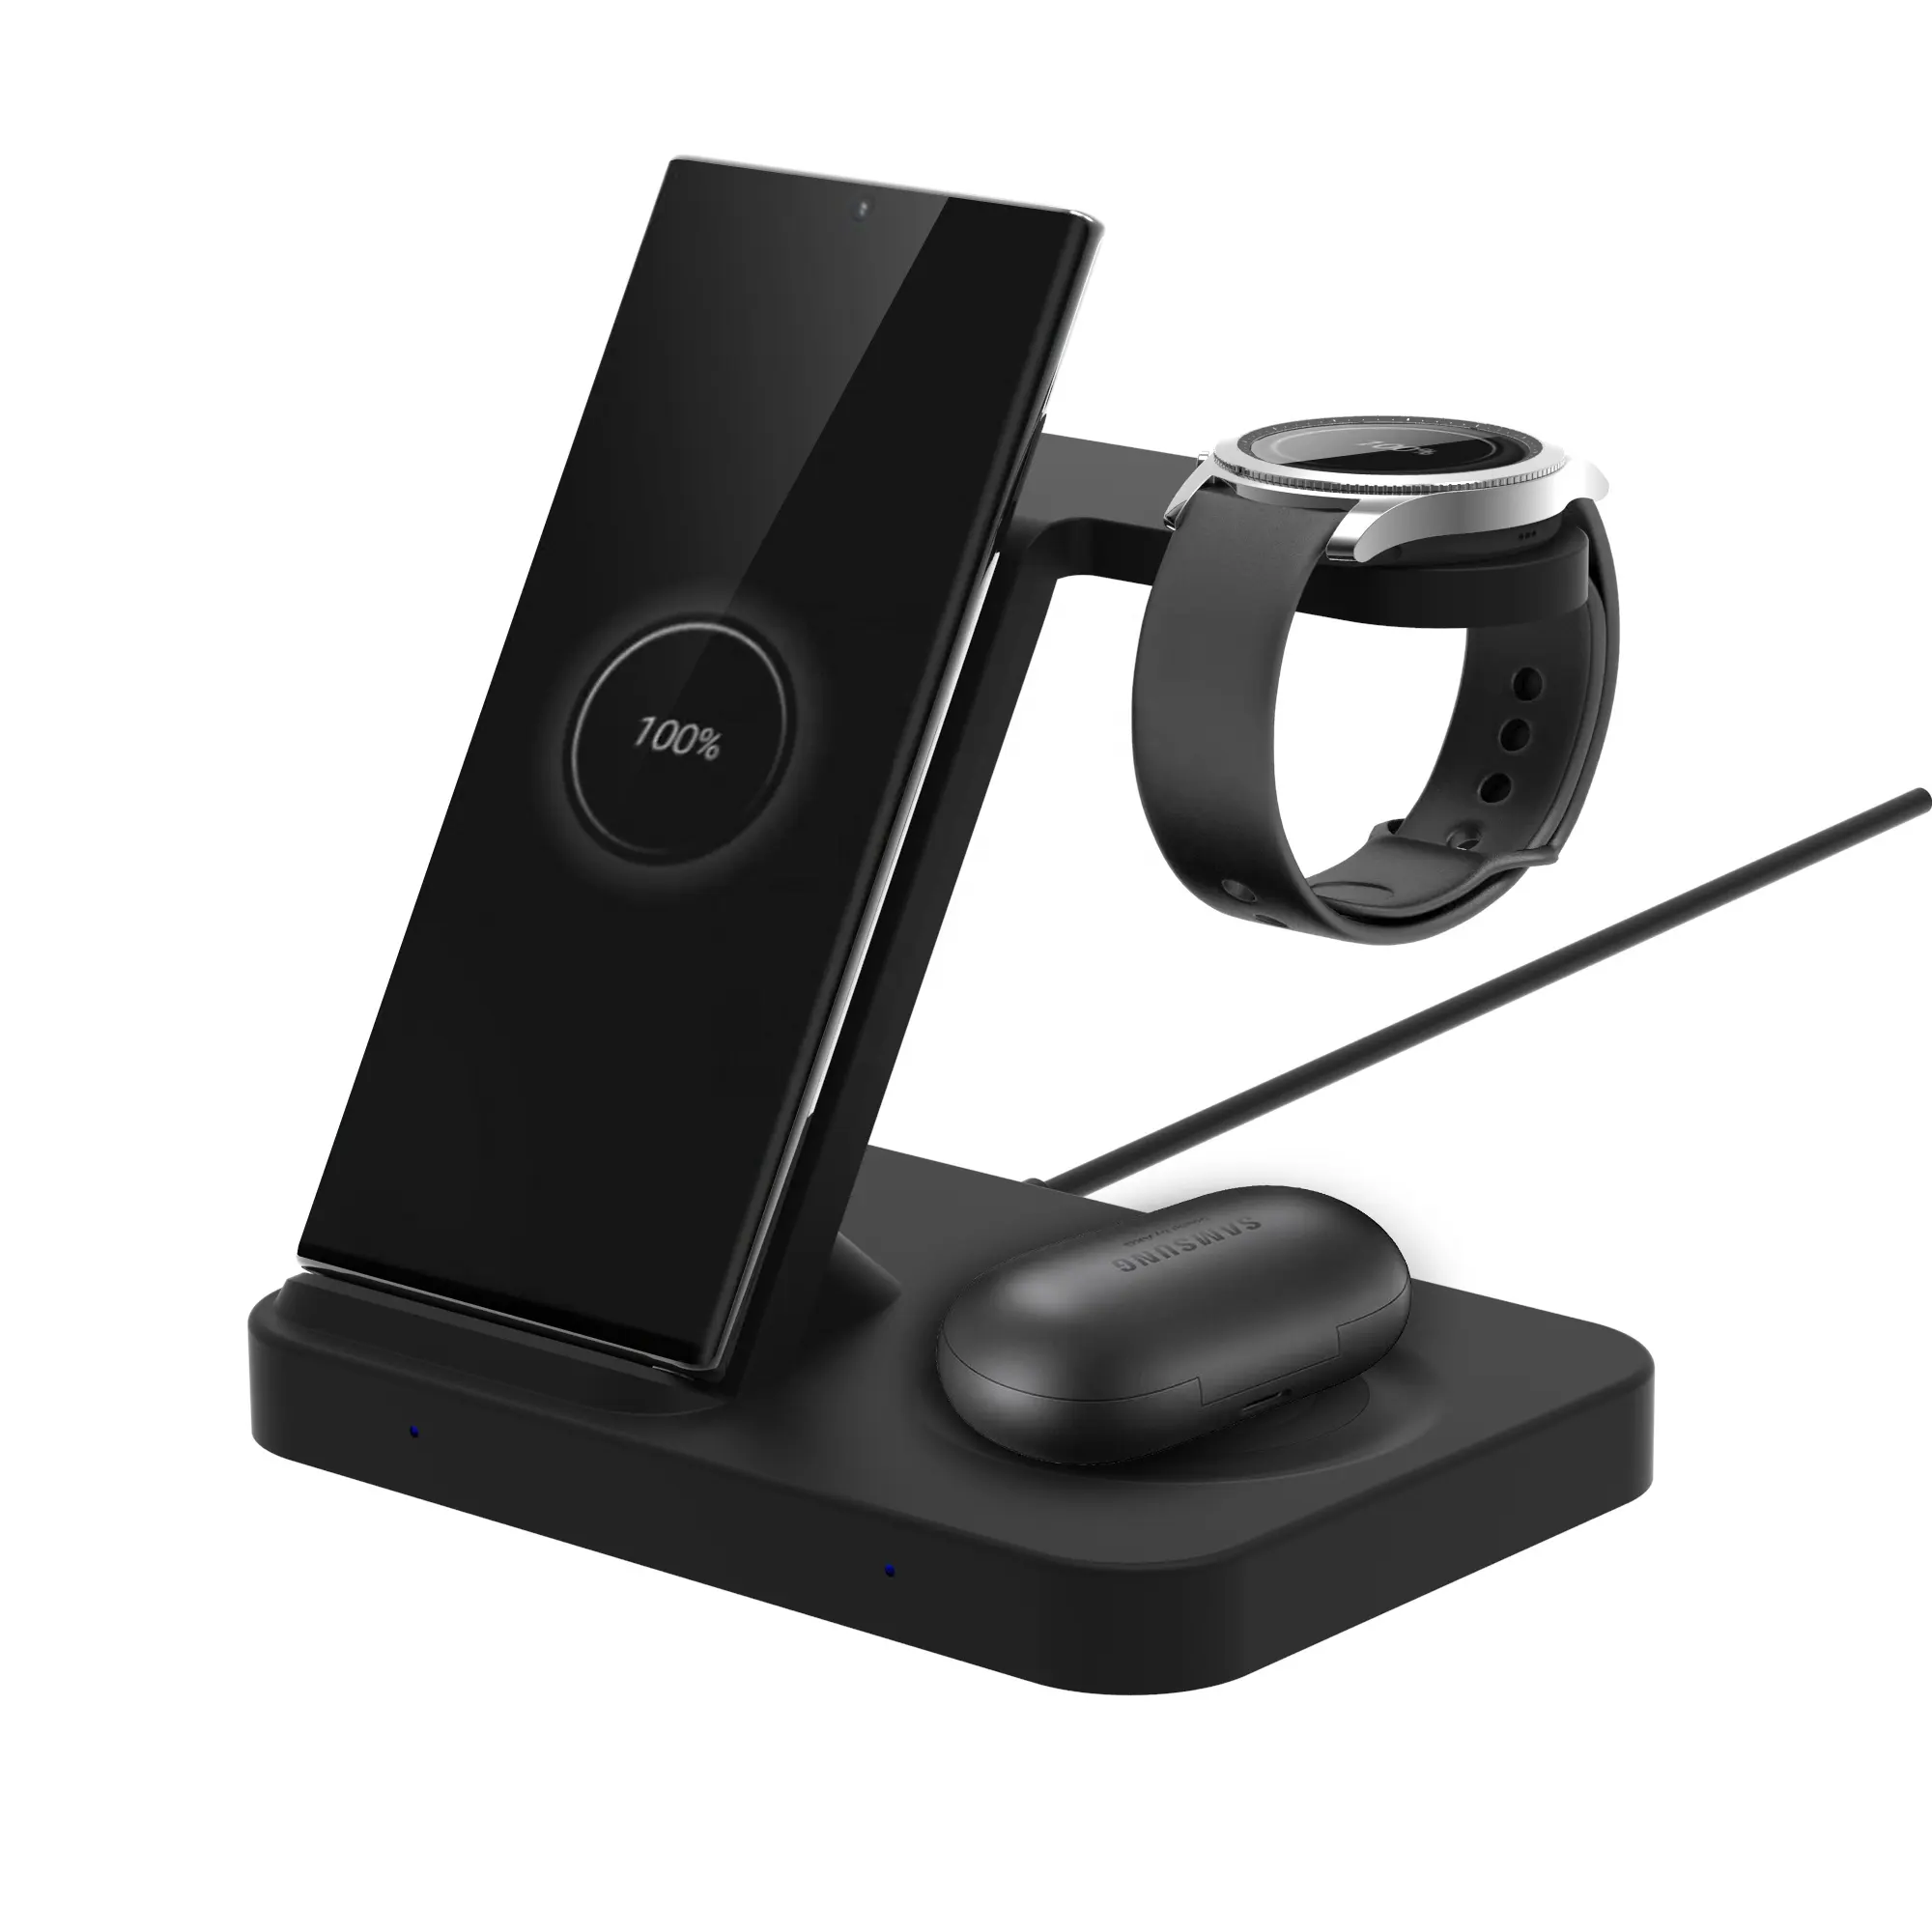 3 in 1 Fast Wireless Charger Station for Galaxy Phone and Galaxy Watch and Galaxy Buds and Airpods with Extra USB Charging Port